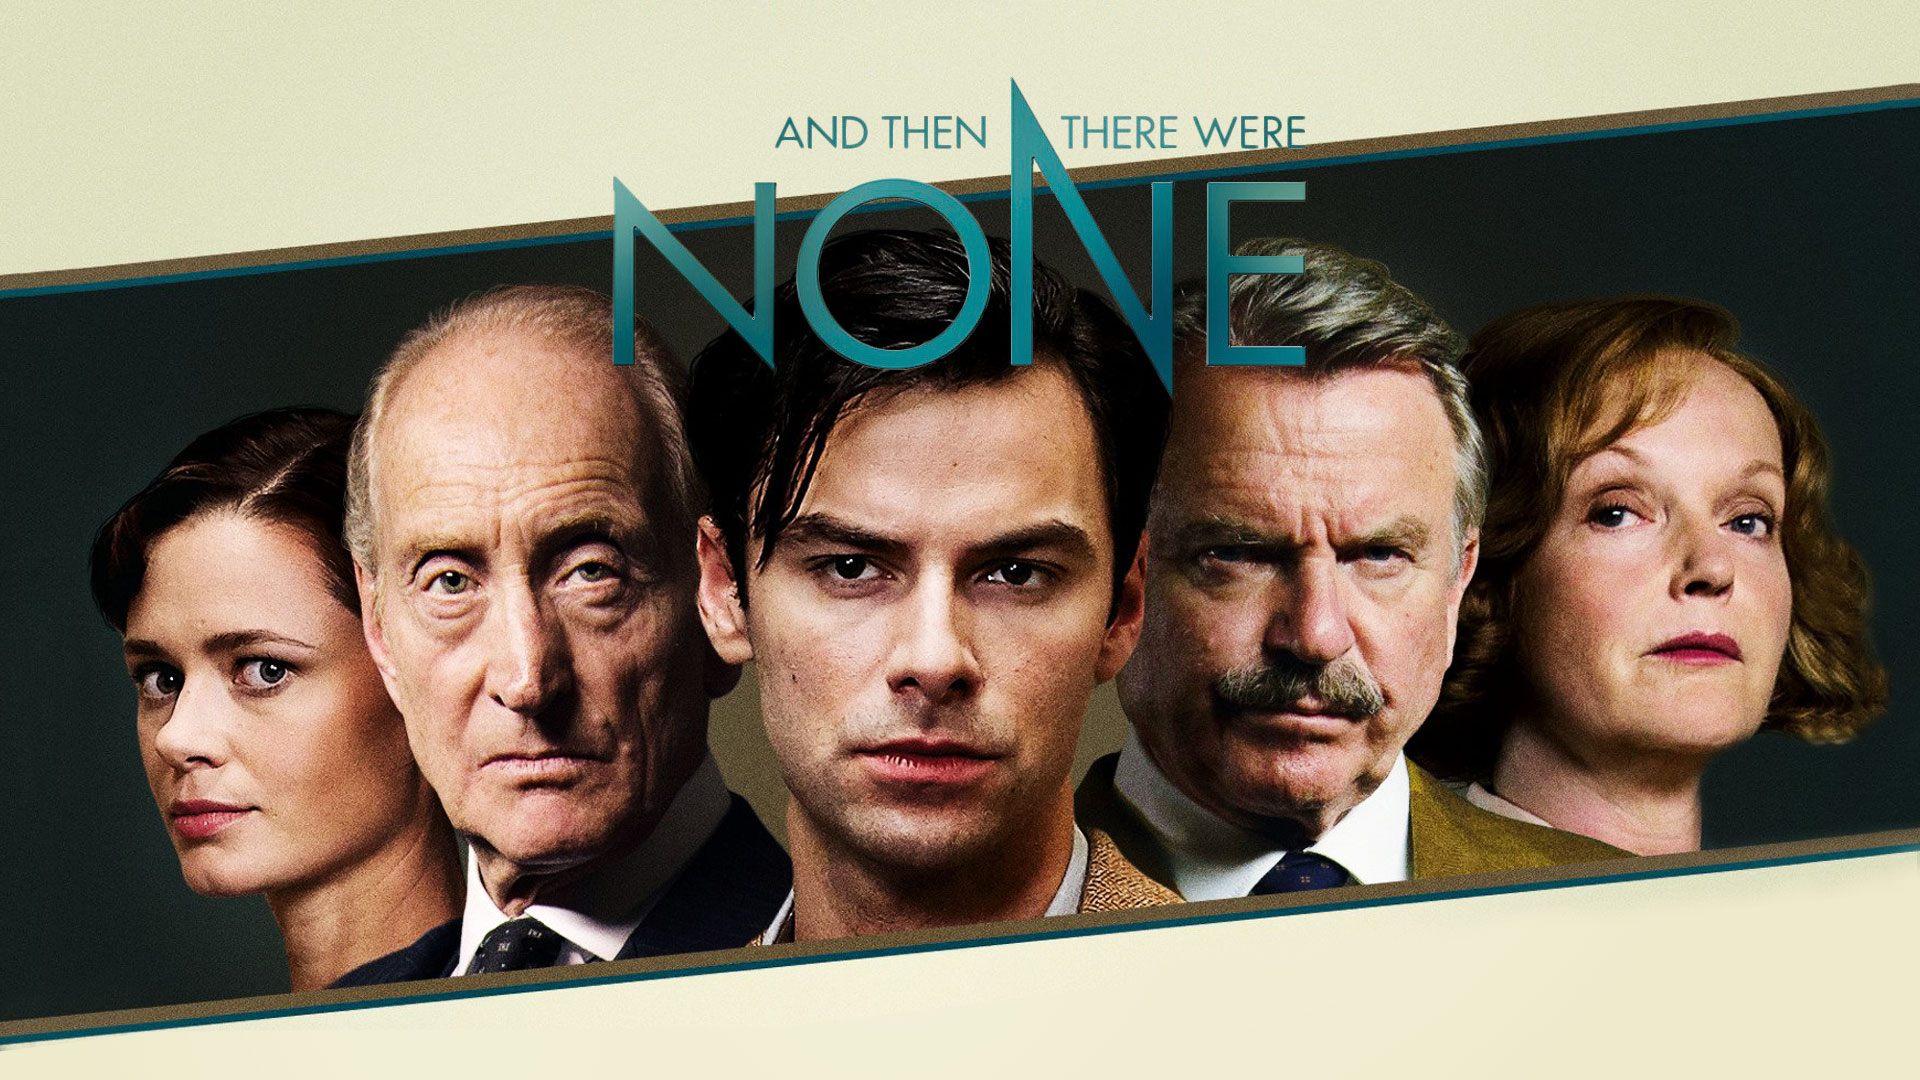 TV Show And Then There Were None 1920x1080